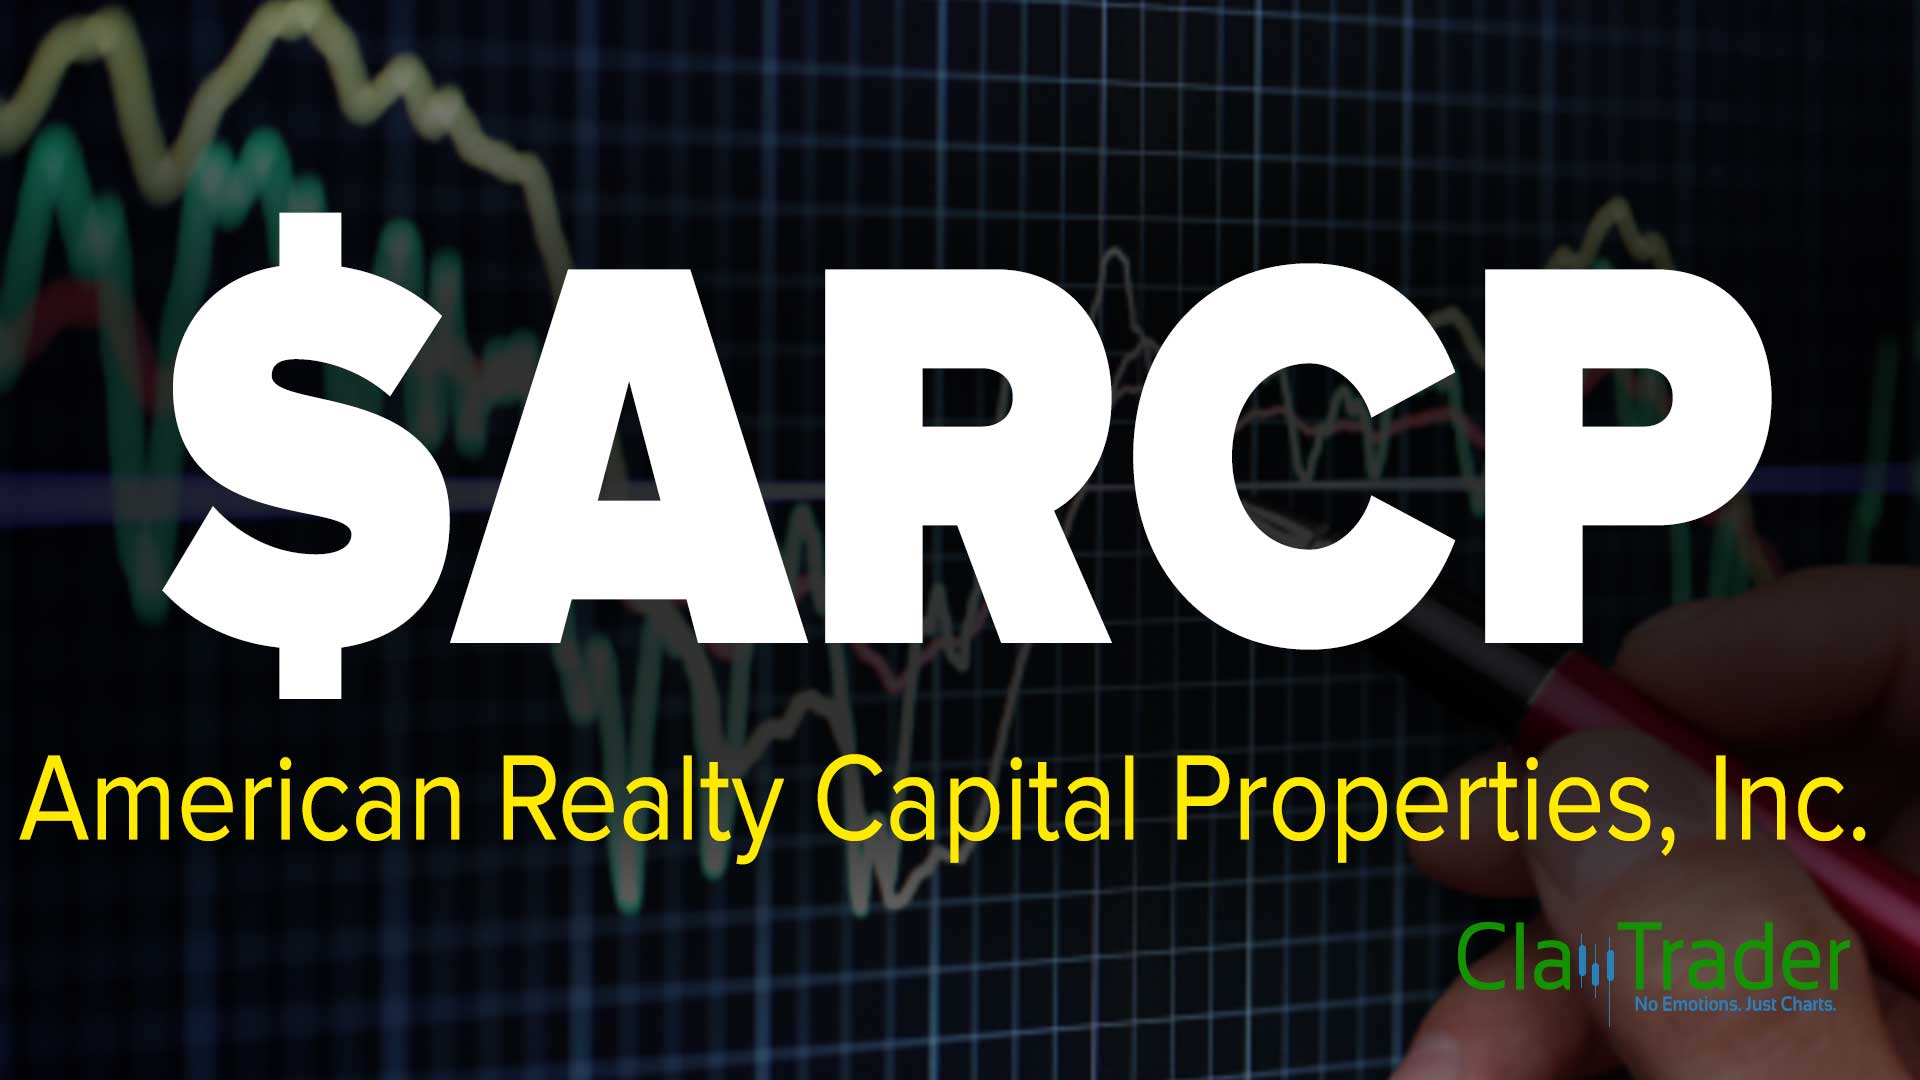 American Realty Capital Properties, Inc. (ARCP) Stock Chart Technical Analysis